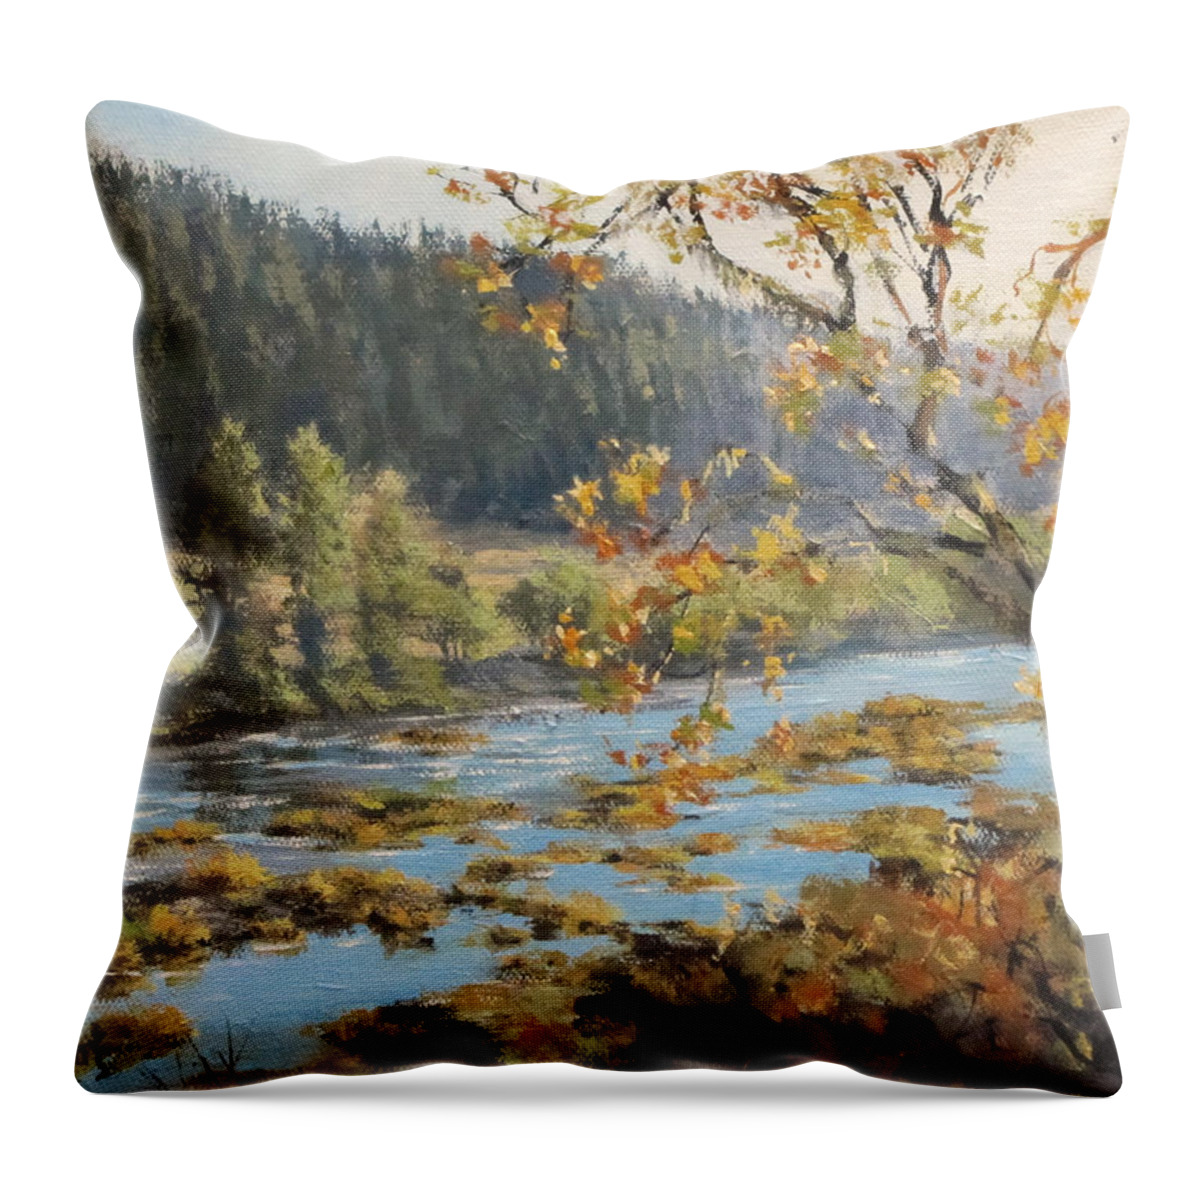 Landscape Throw Pillow featuring the painting Autumn Afternoon by Karen Ilari